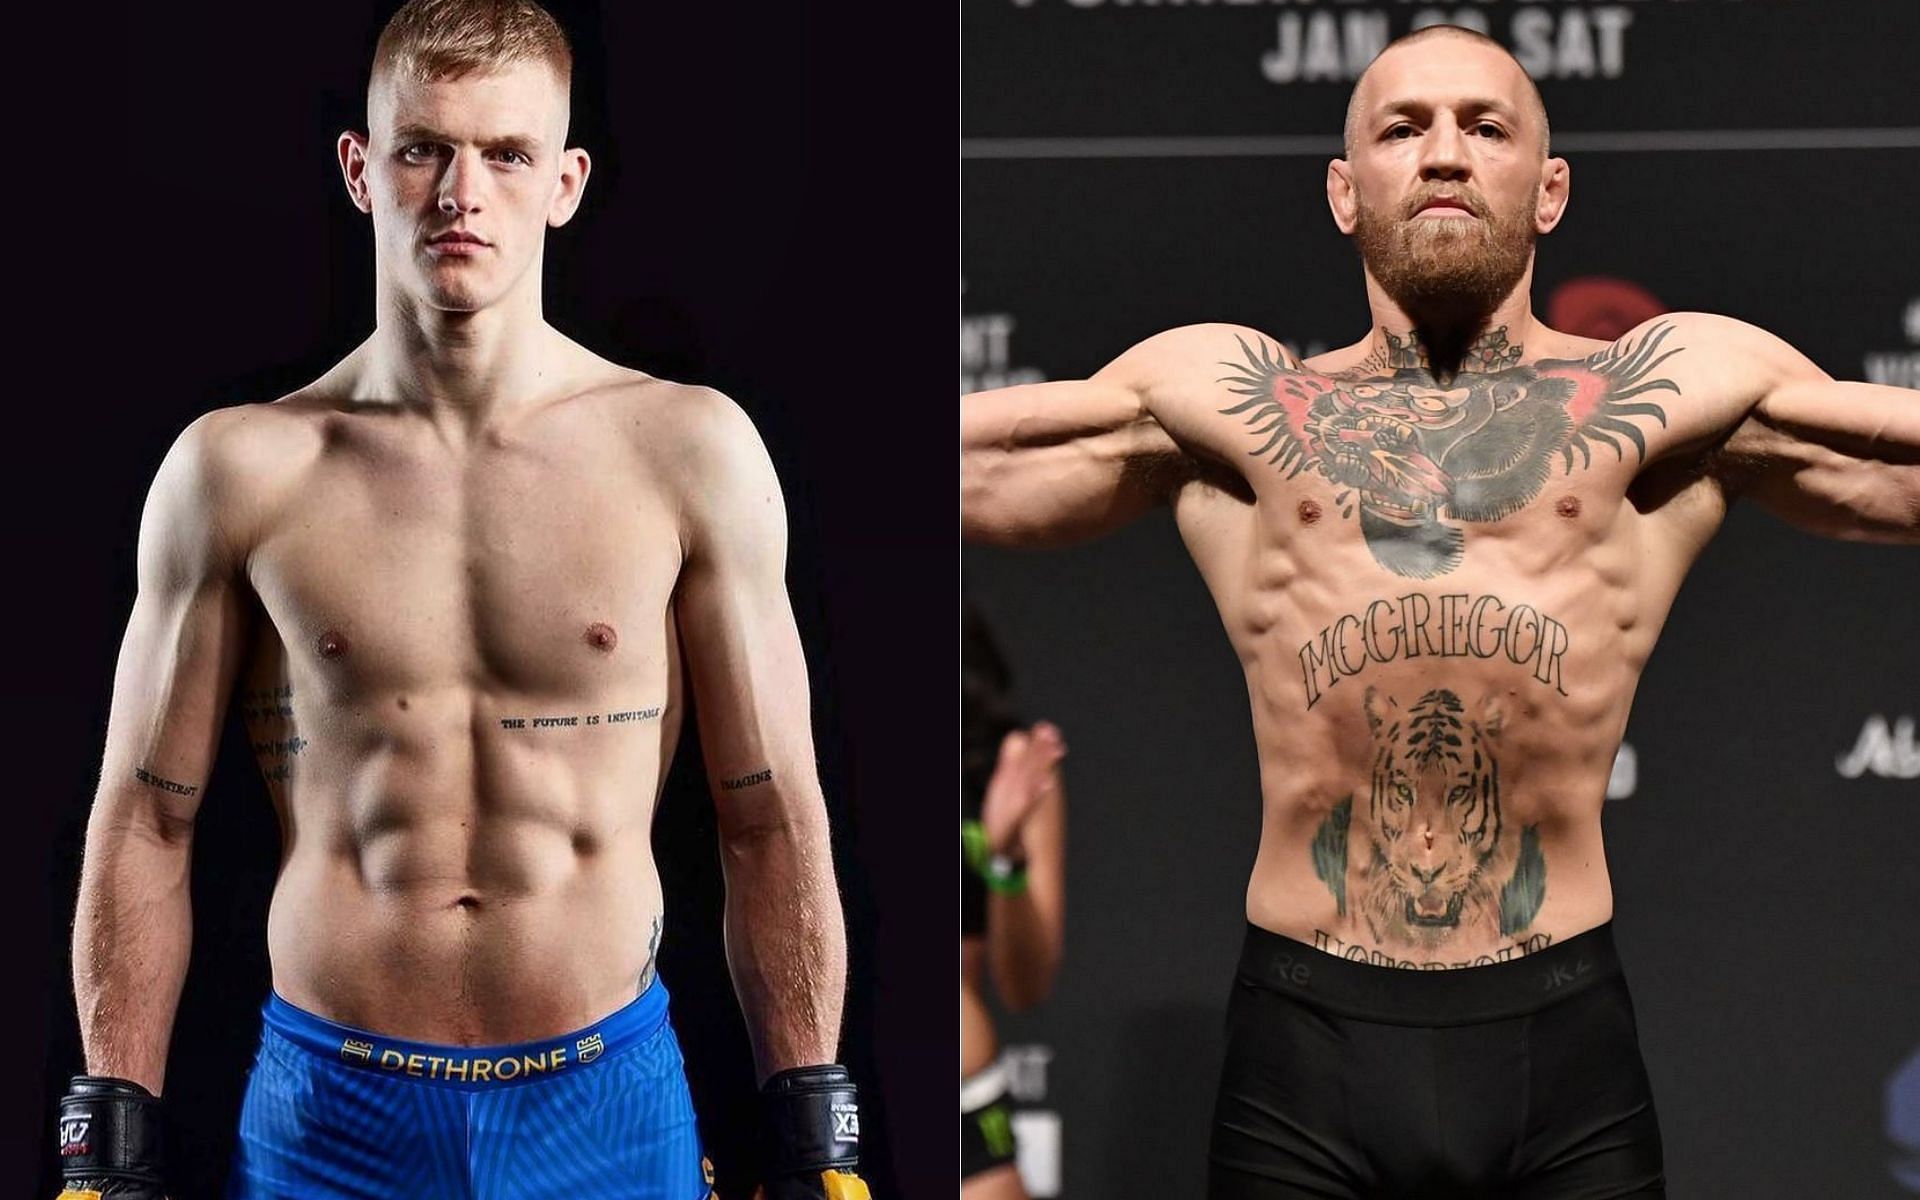 Ian Garry (left) and Conor McGregor (right) [Left Image Courtesy: @iangarry on Instagram]